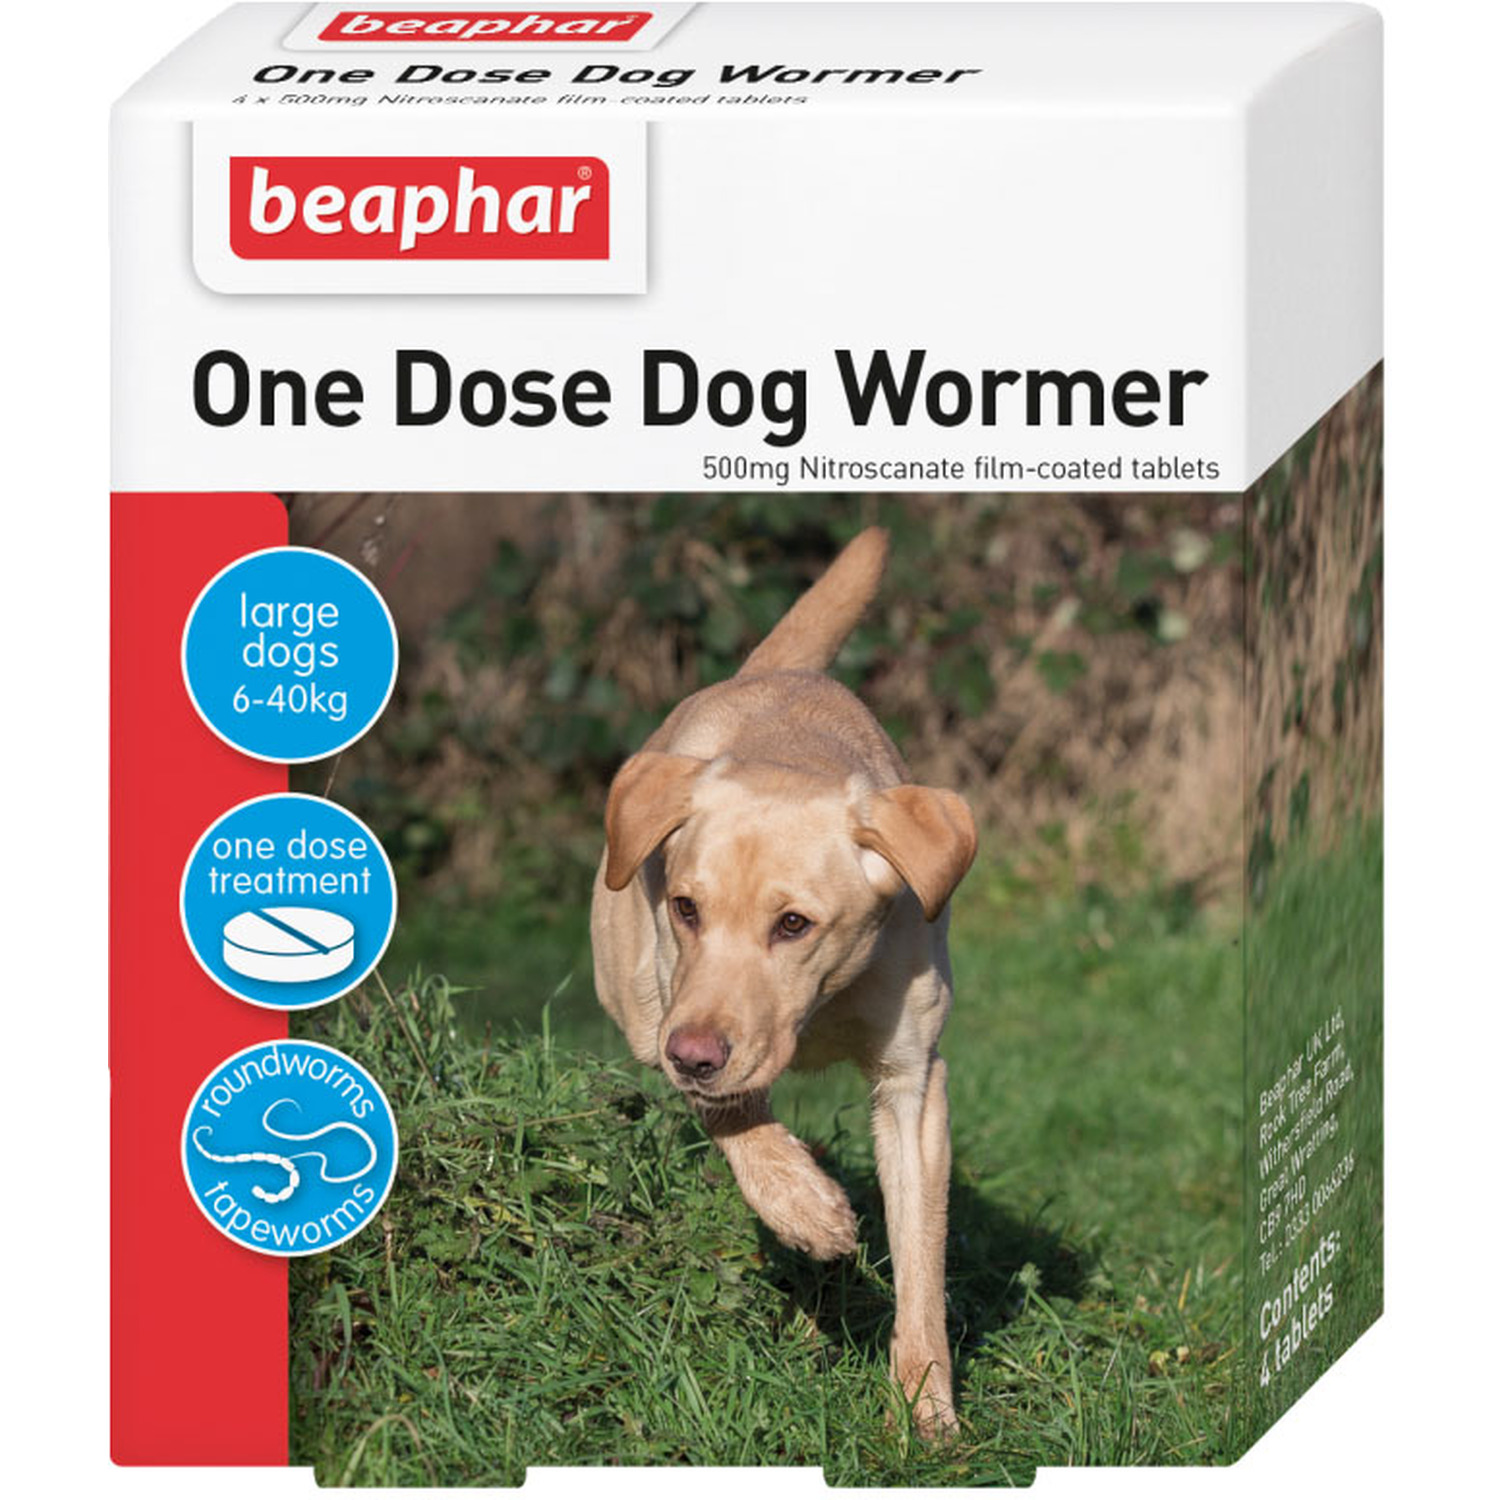 Beaphar One Dose Wormer Tablets For Large Dogs Image